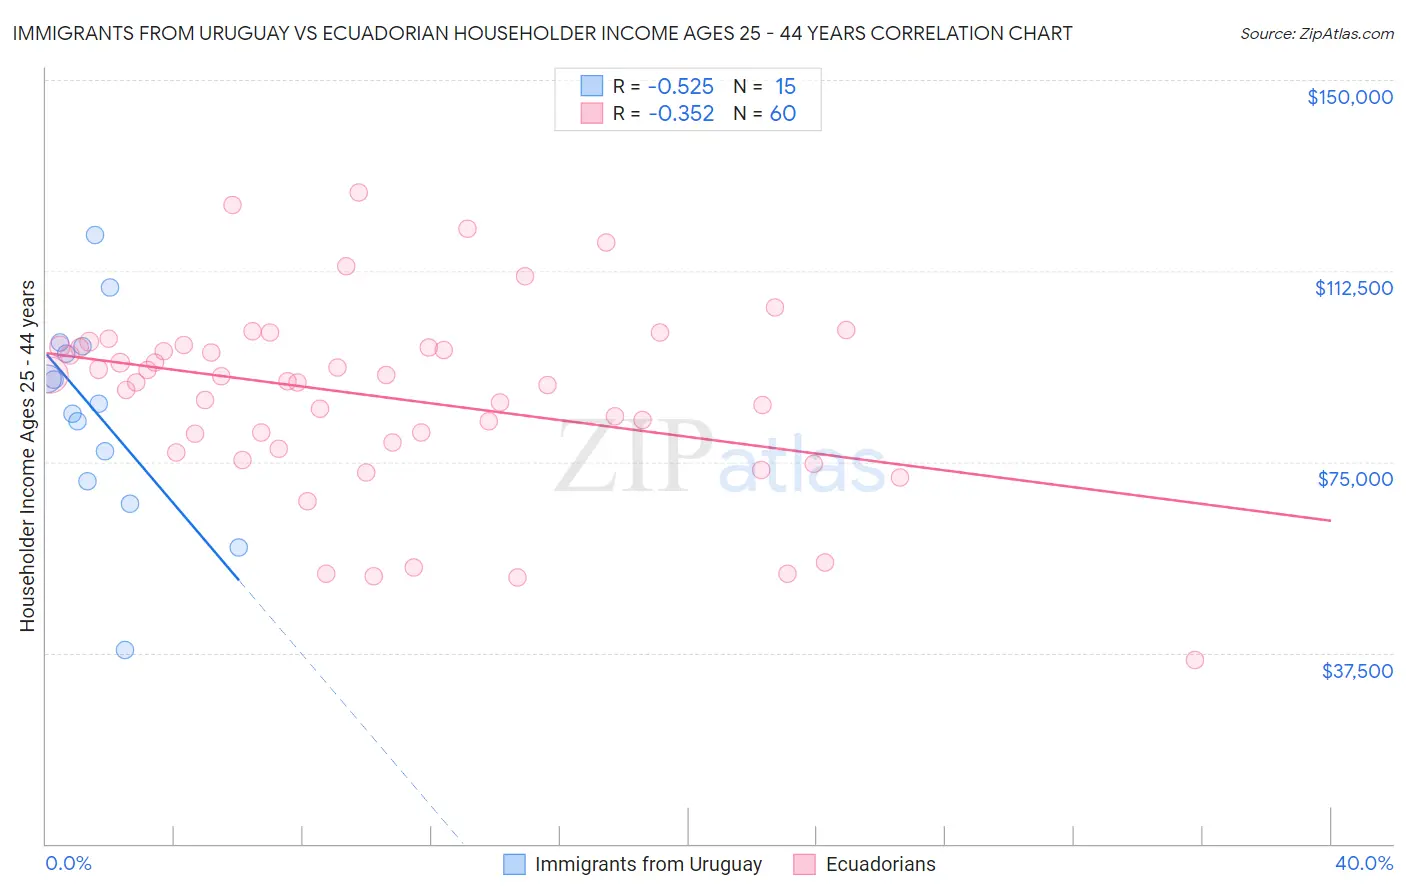 Immigrants from Uruguay vs Ecuadorian Householder Income Ages 25 - 44 years